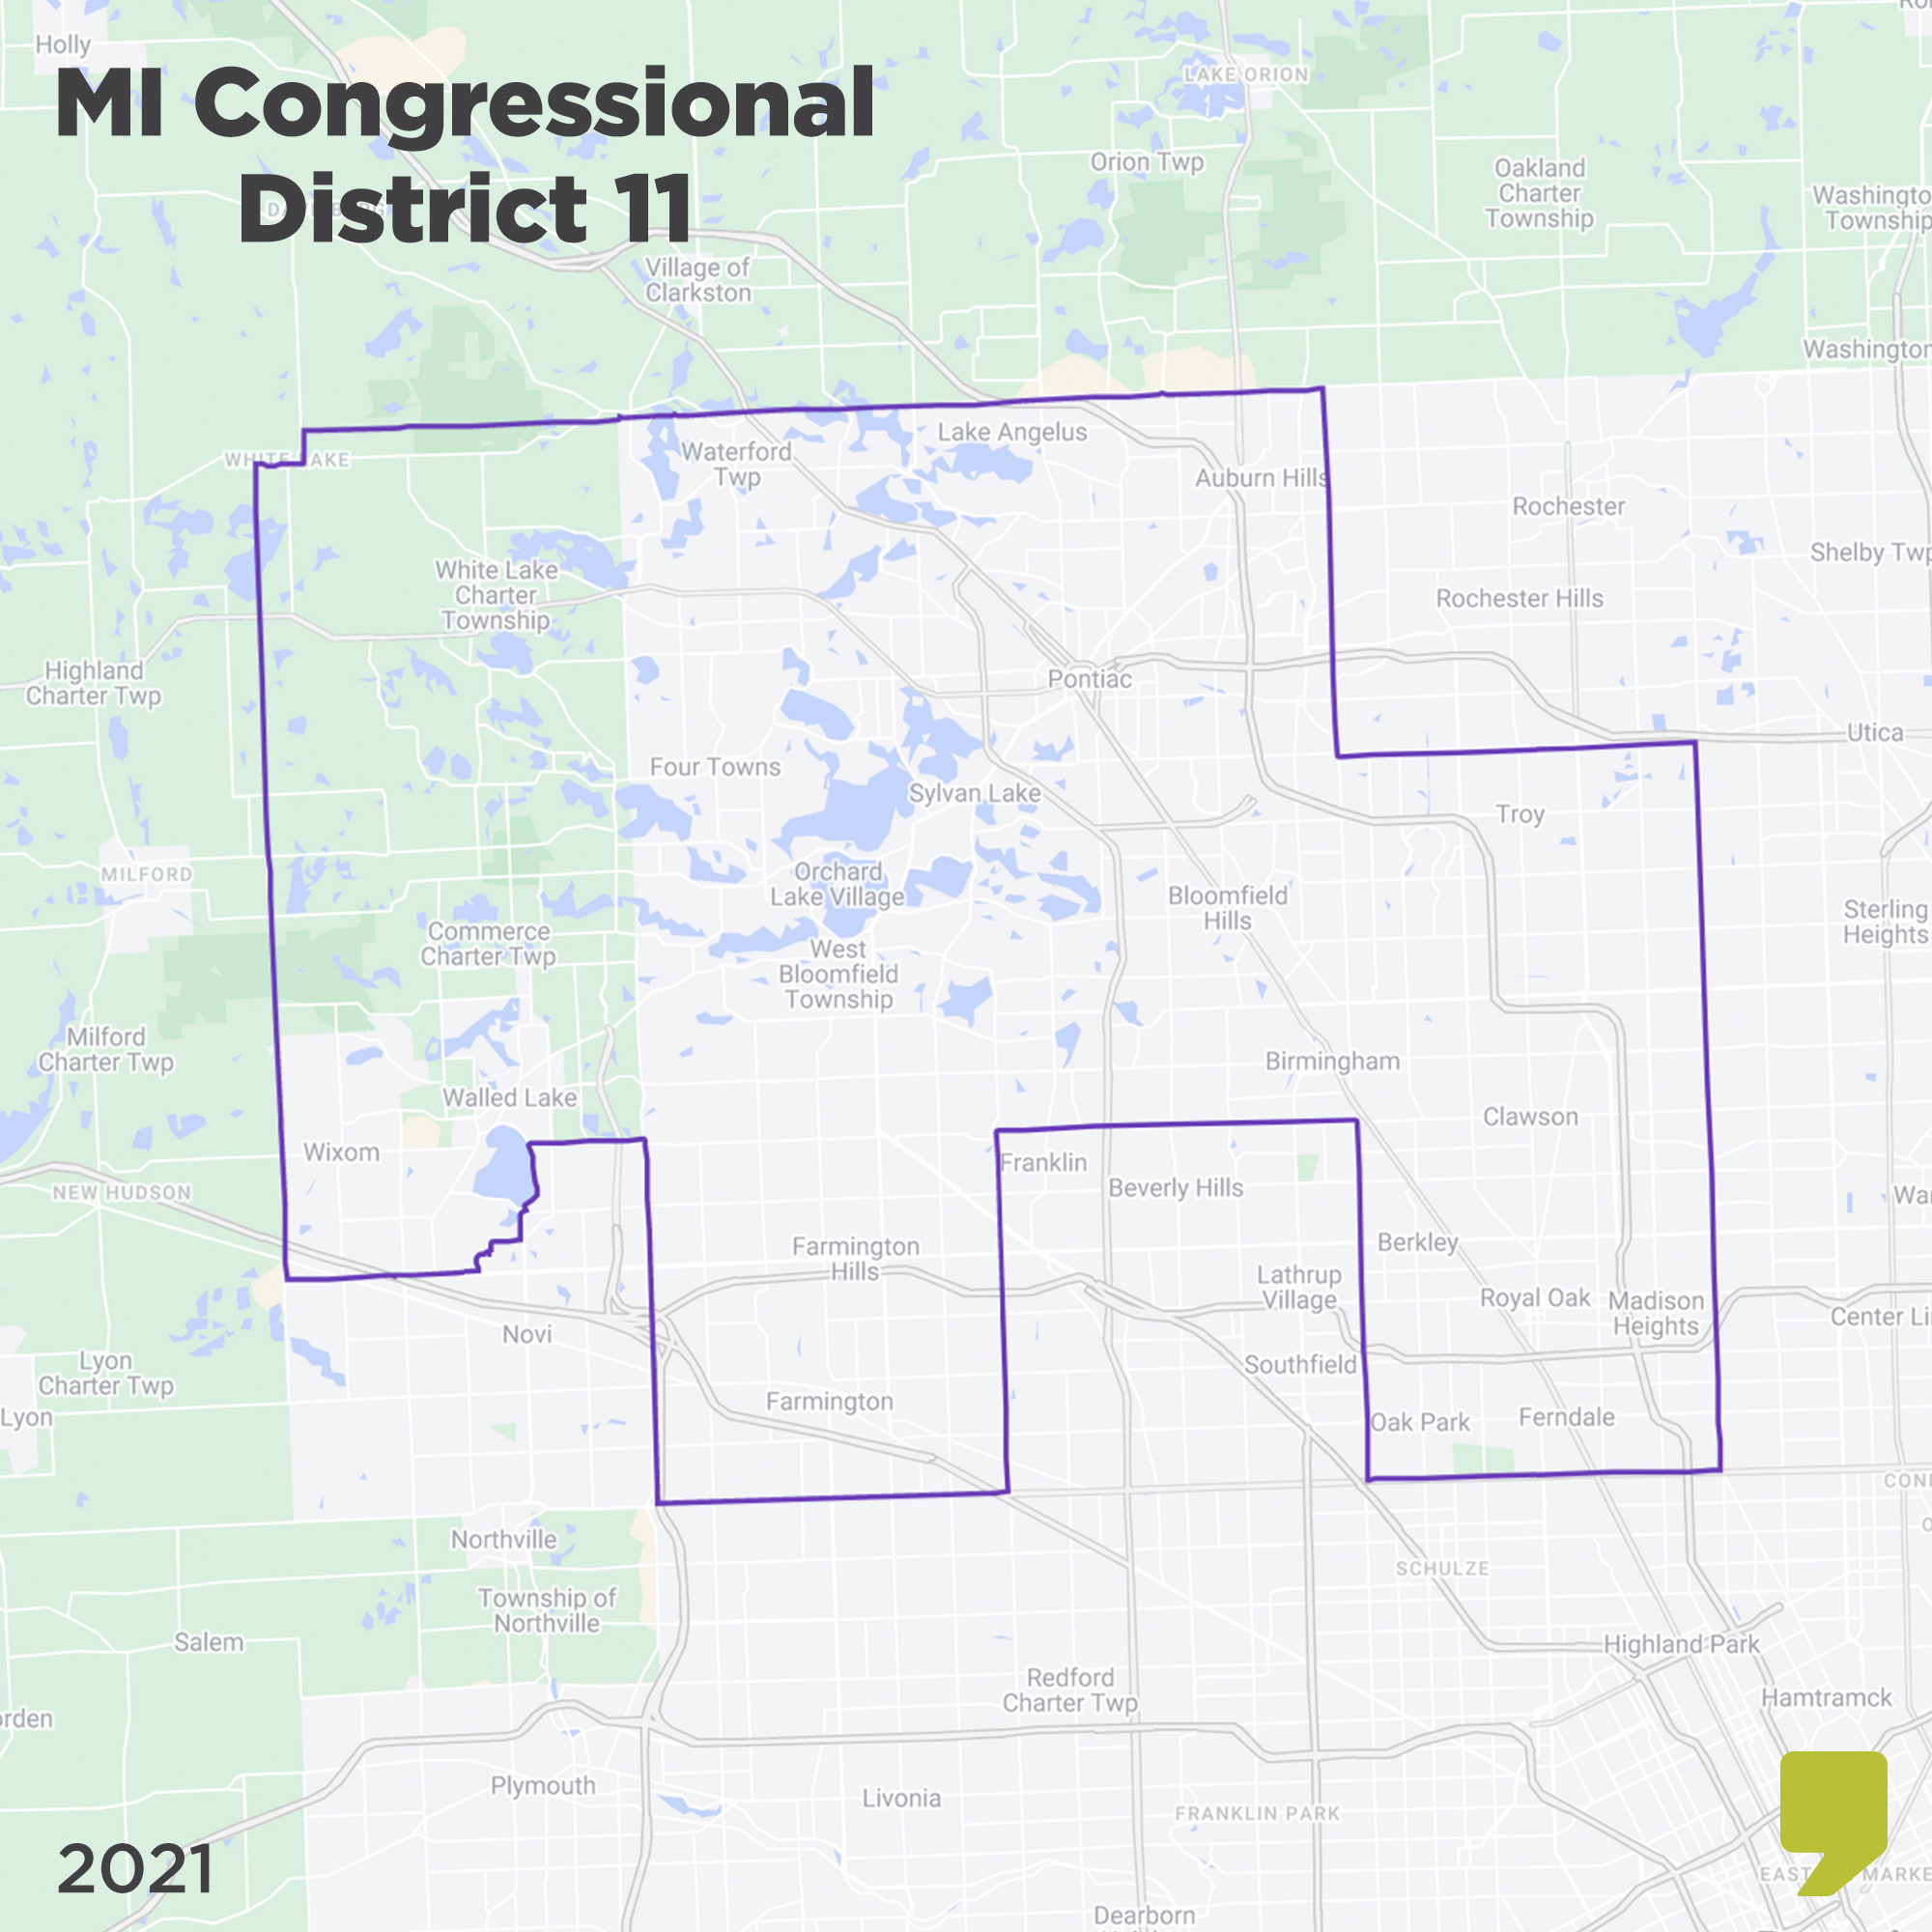 11th Congressional District